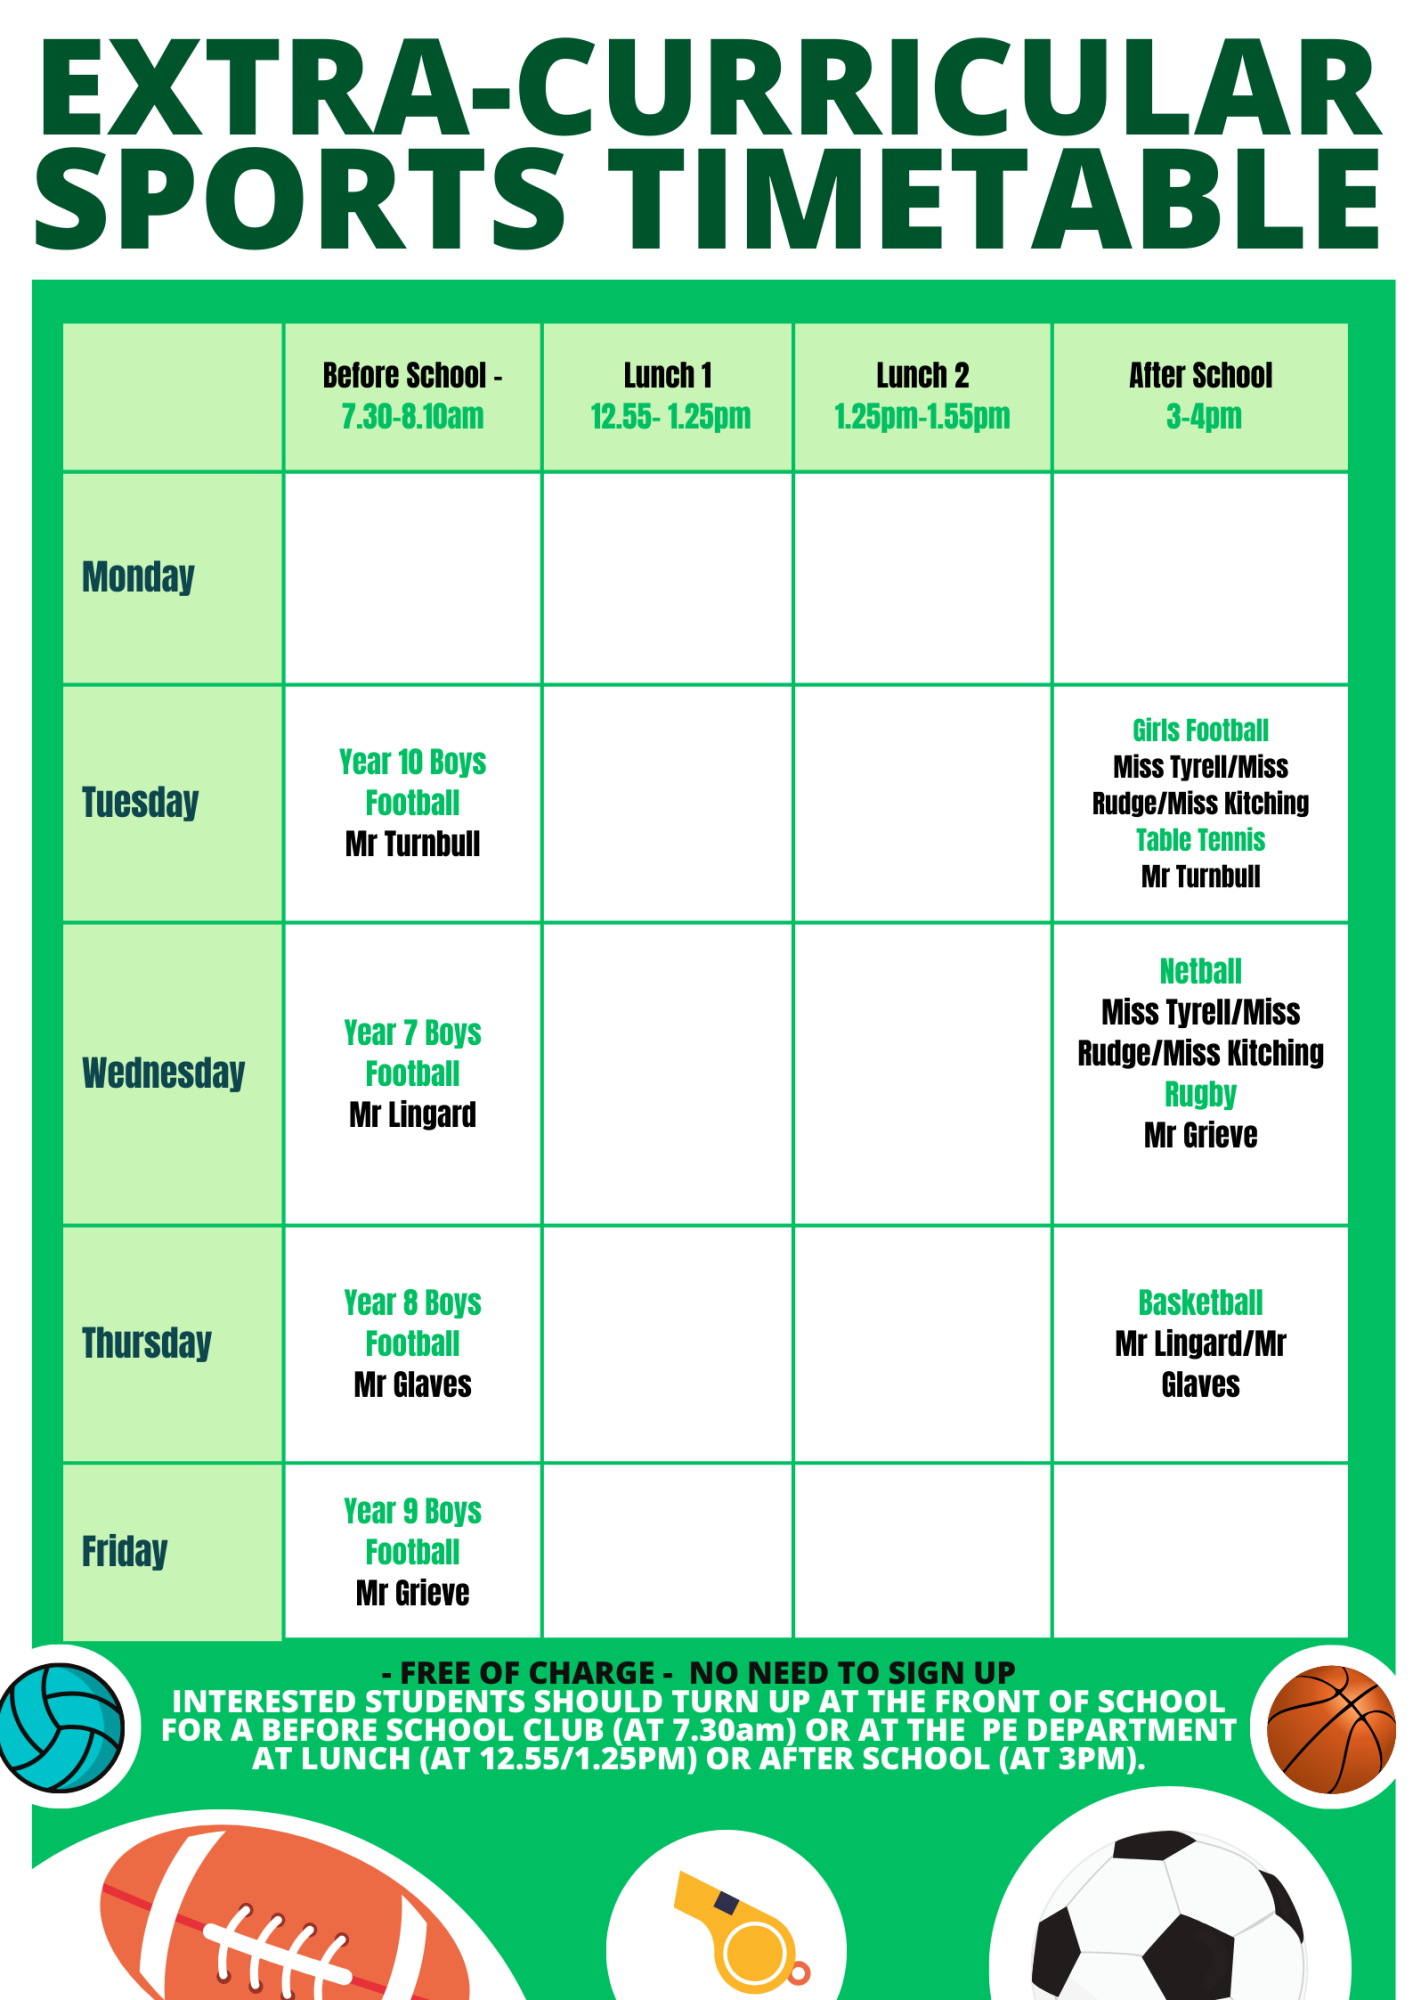 Copy of Extra Curricular Sports Timetable (1)